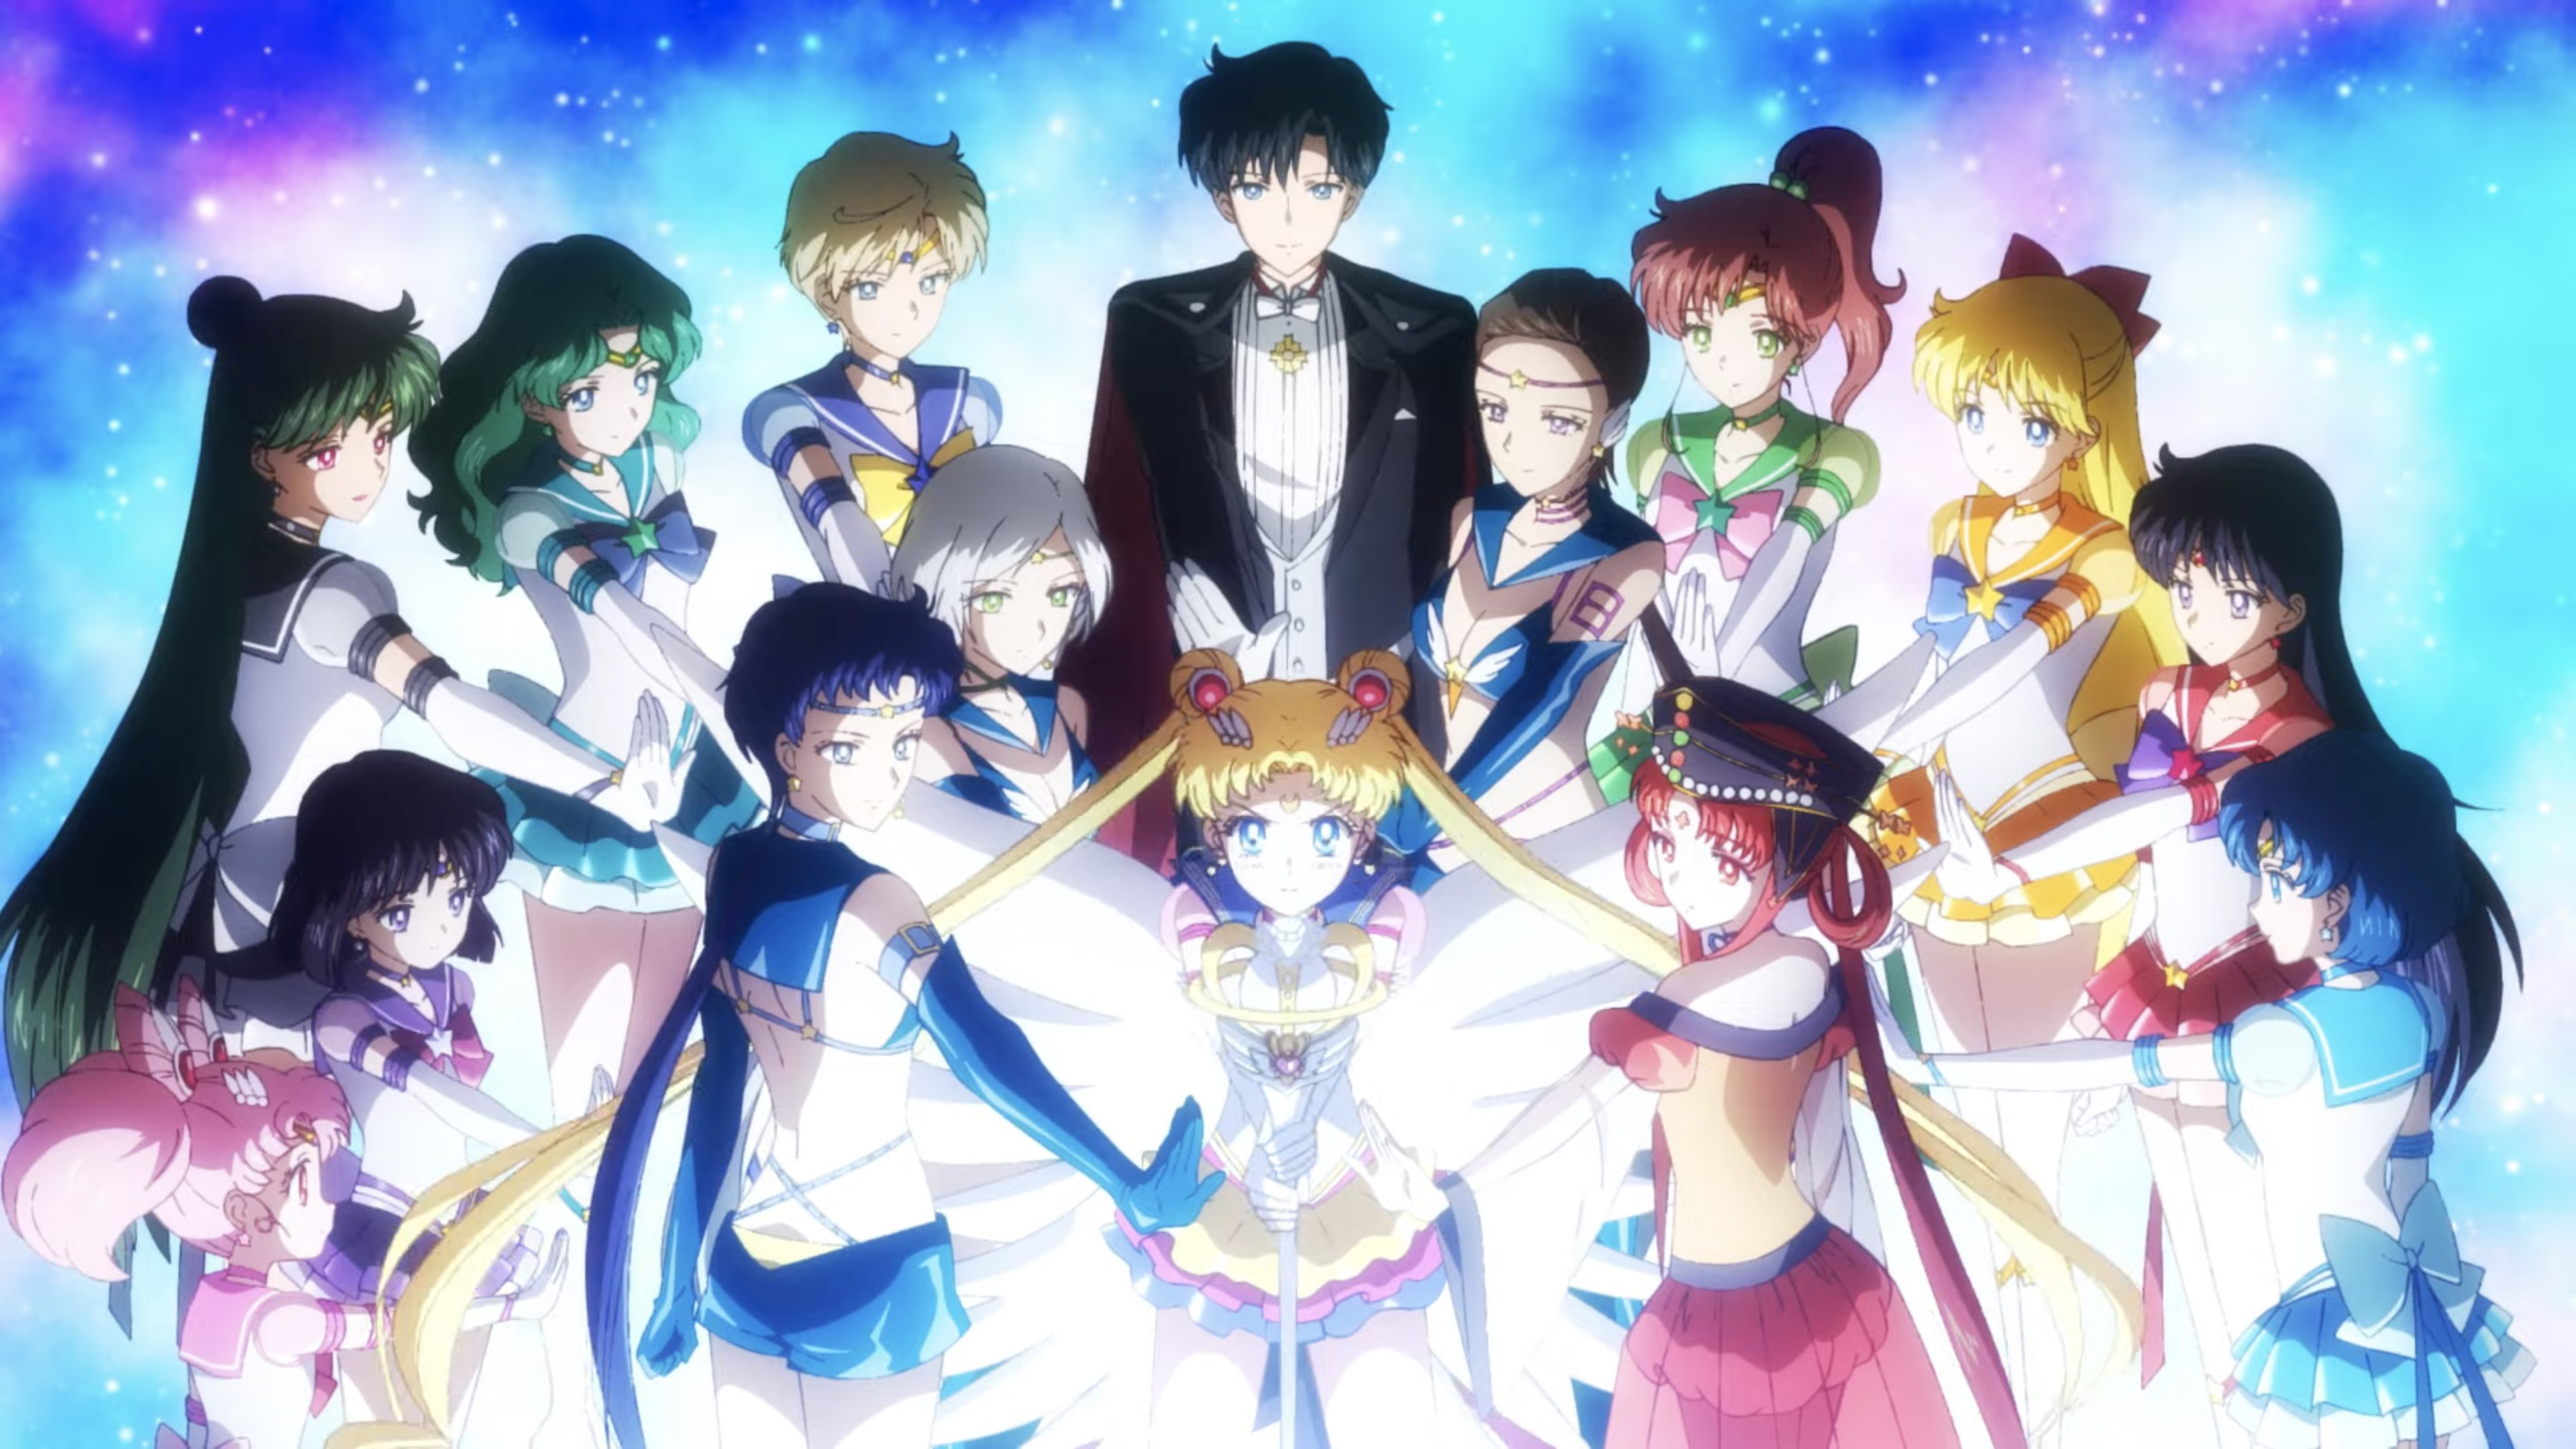 Sailor Moon Cosmos Anime Films Showcase Franchise’s Final Battle in New Trailer